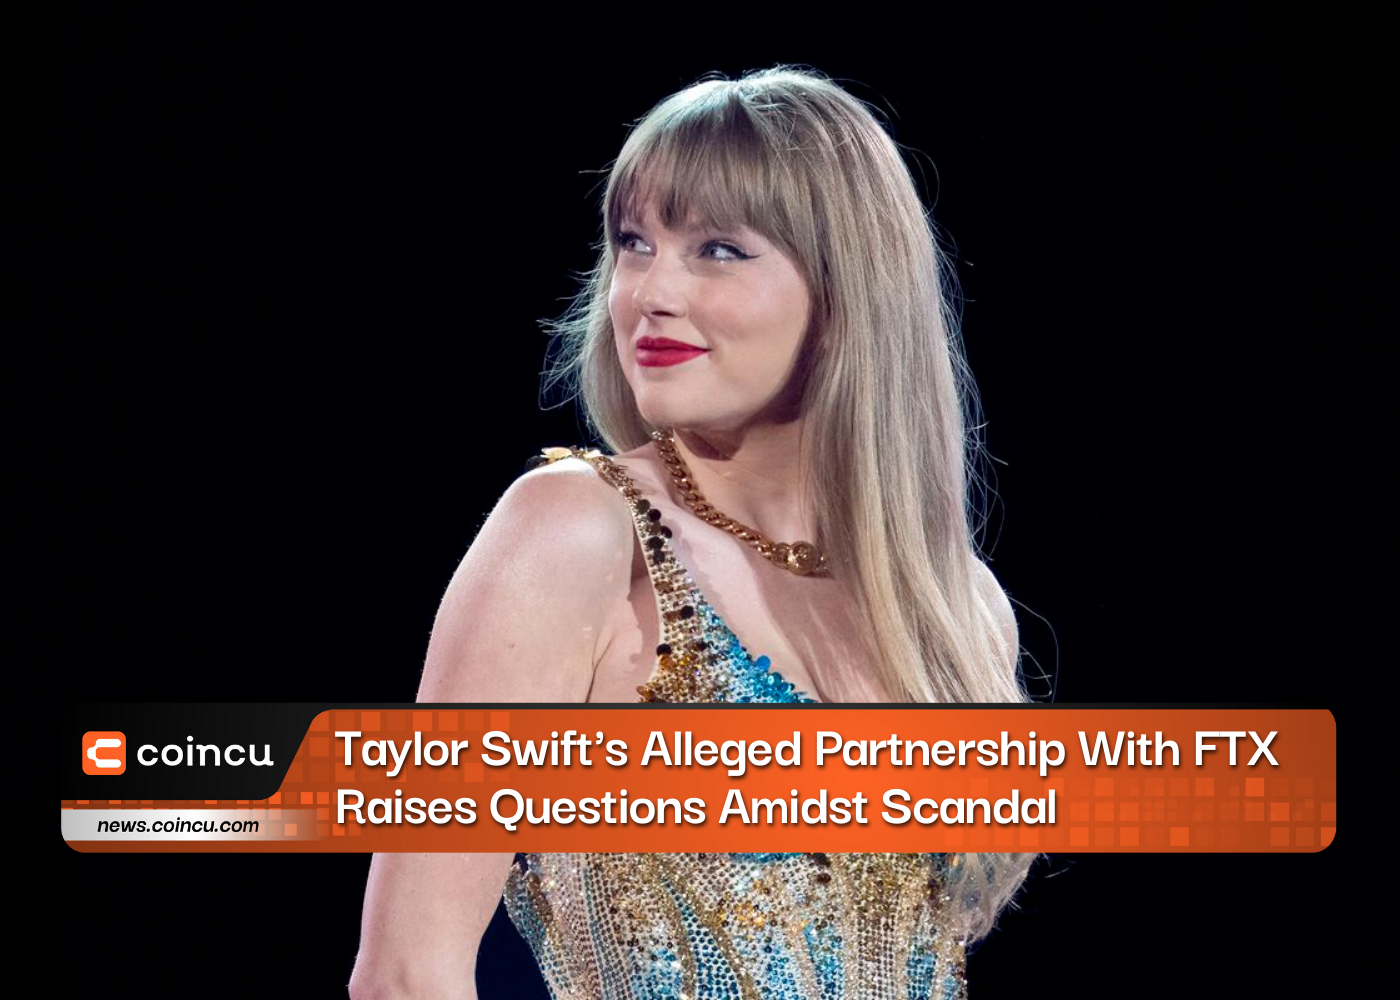 Taylor Swift's Alleged Partnership With FTX Raises Questions Amidst Scandal